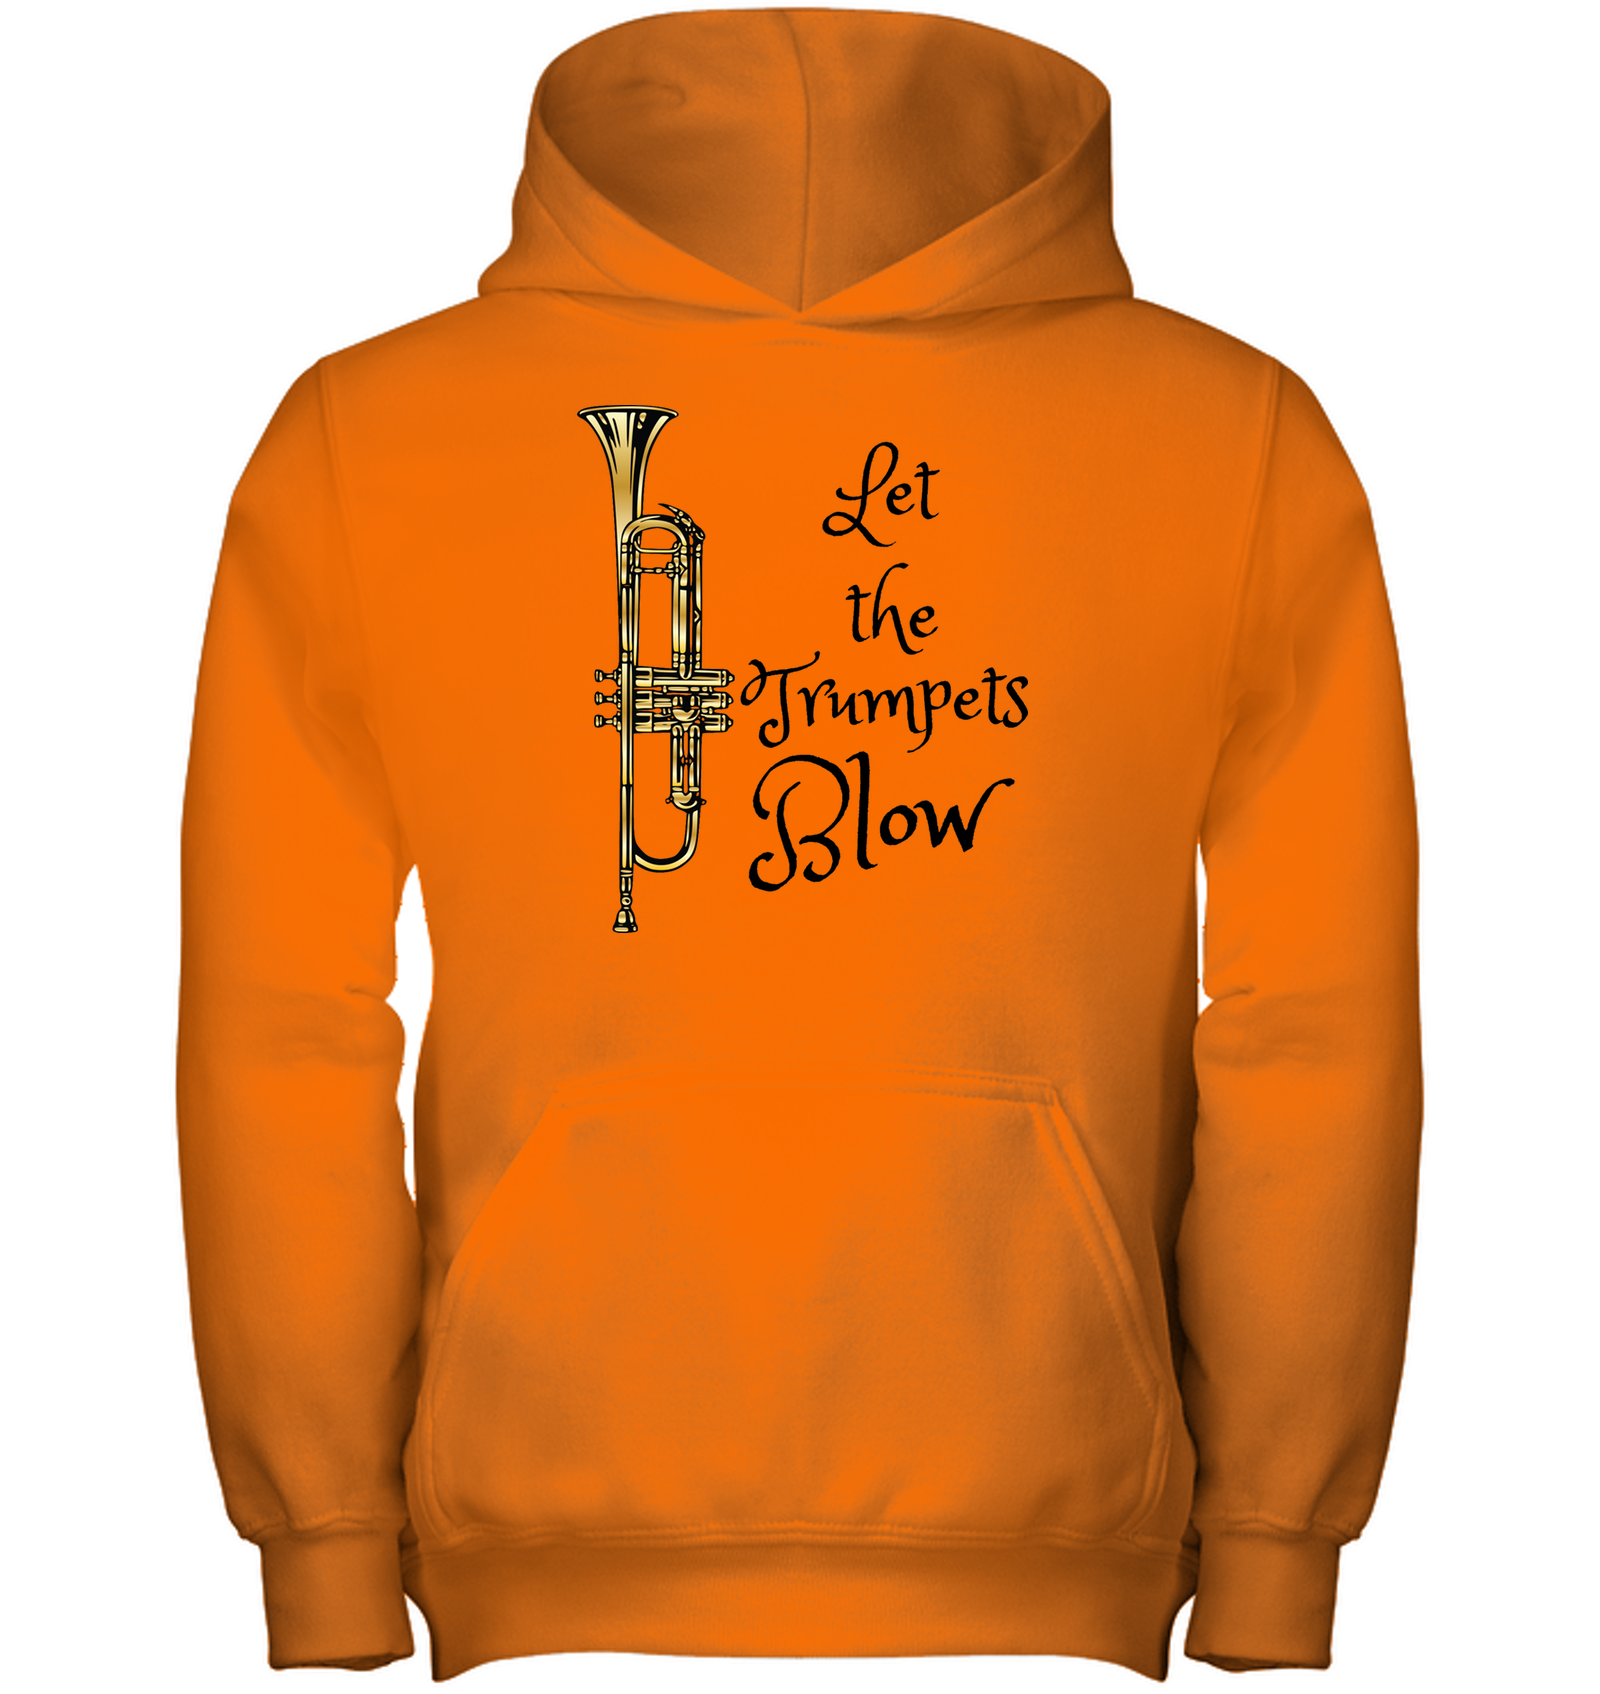 Let the Trumpets Blow - Gildan Youth Heavyweight Pullover Hoodie